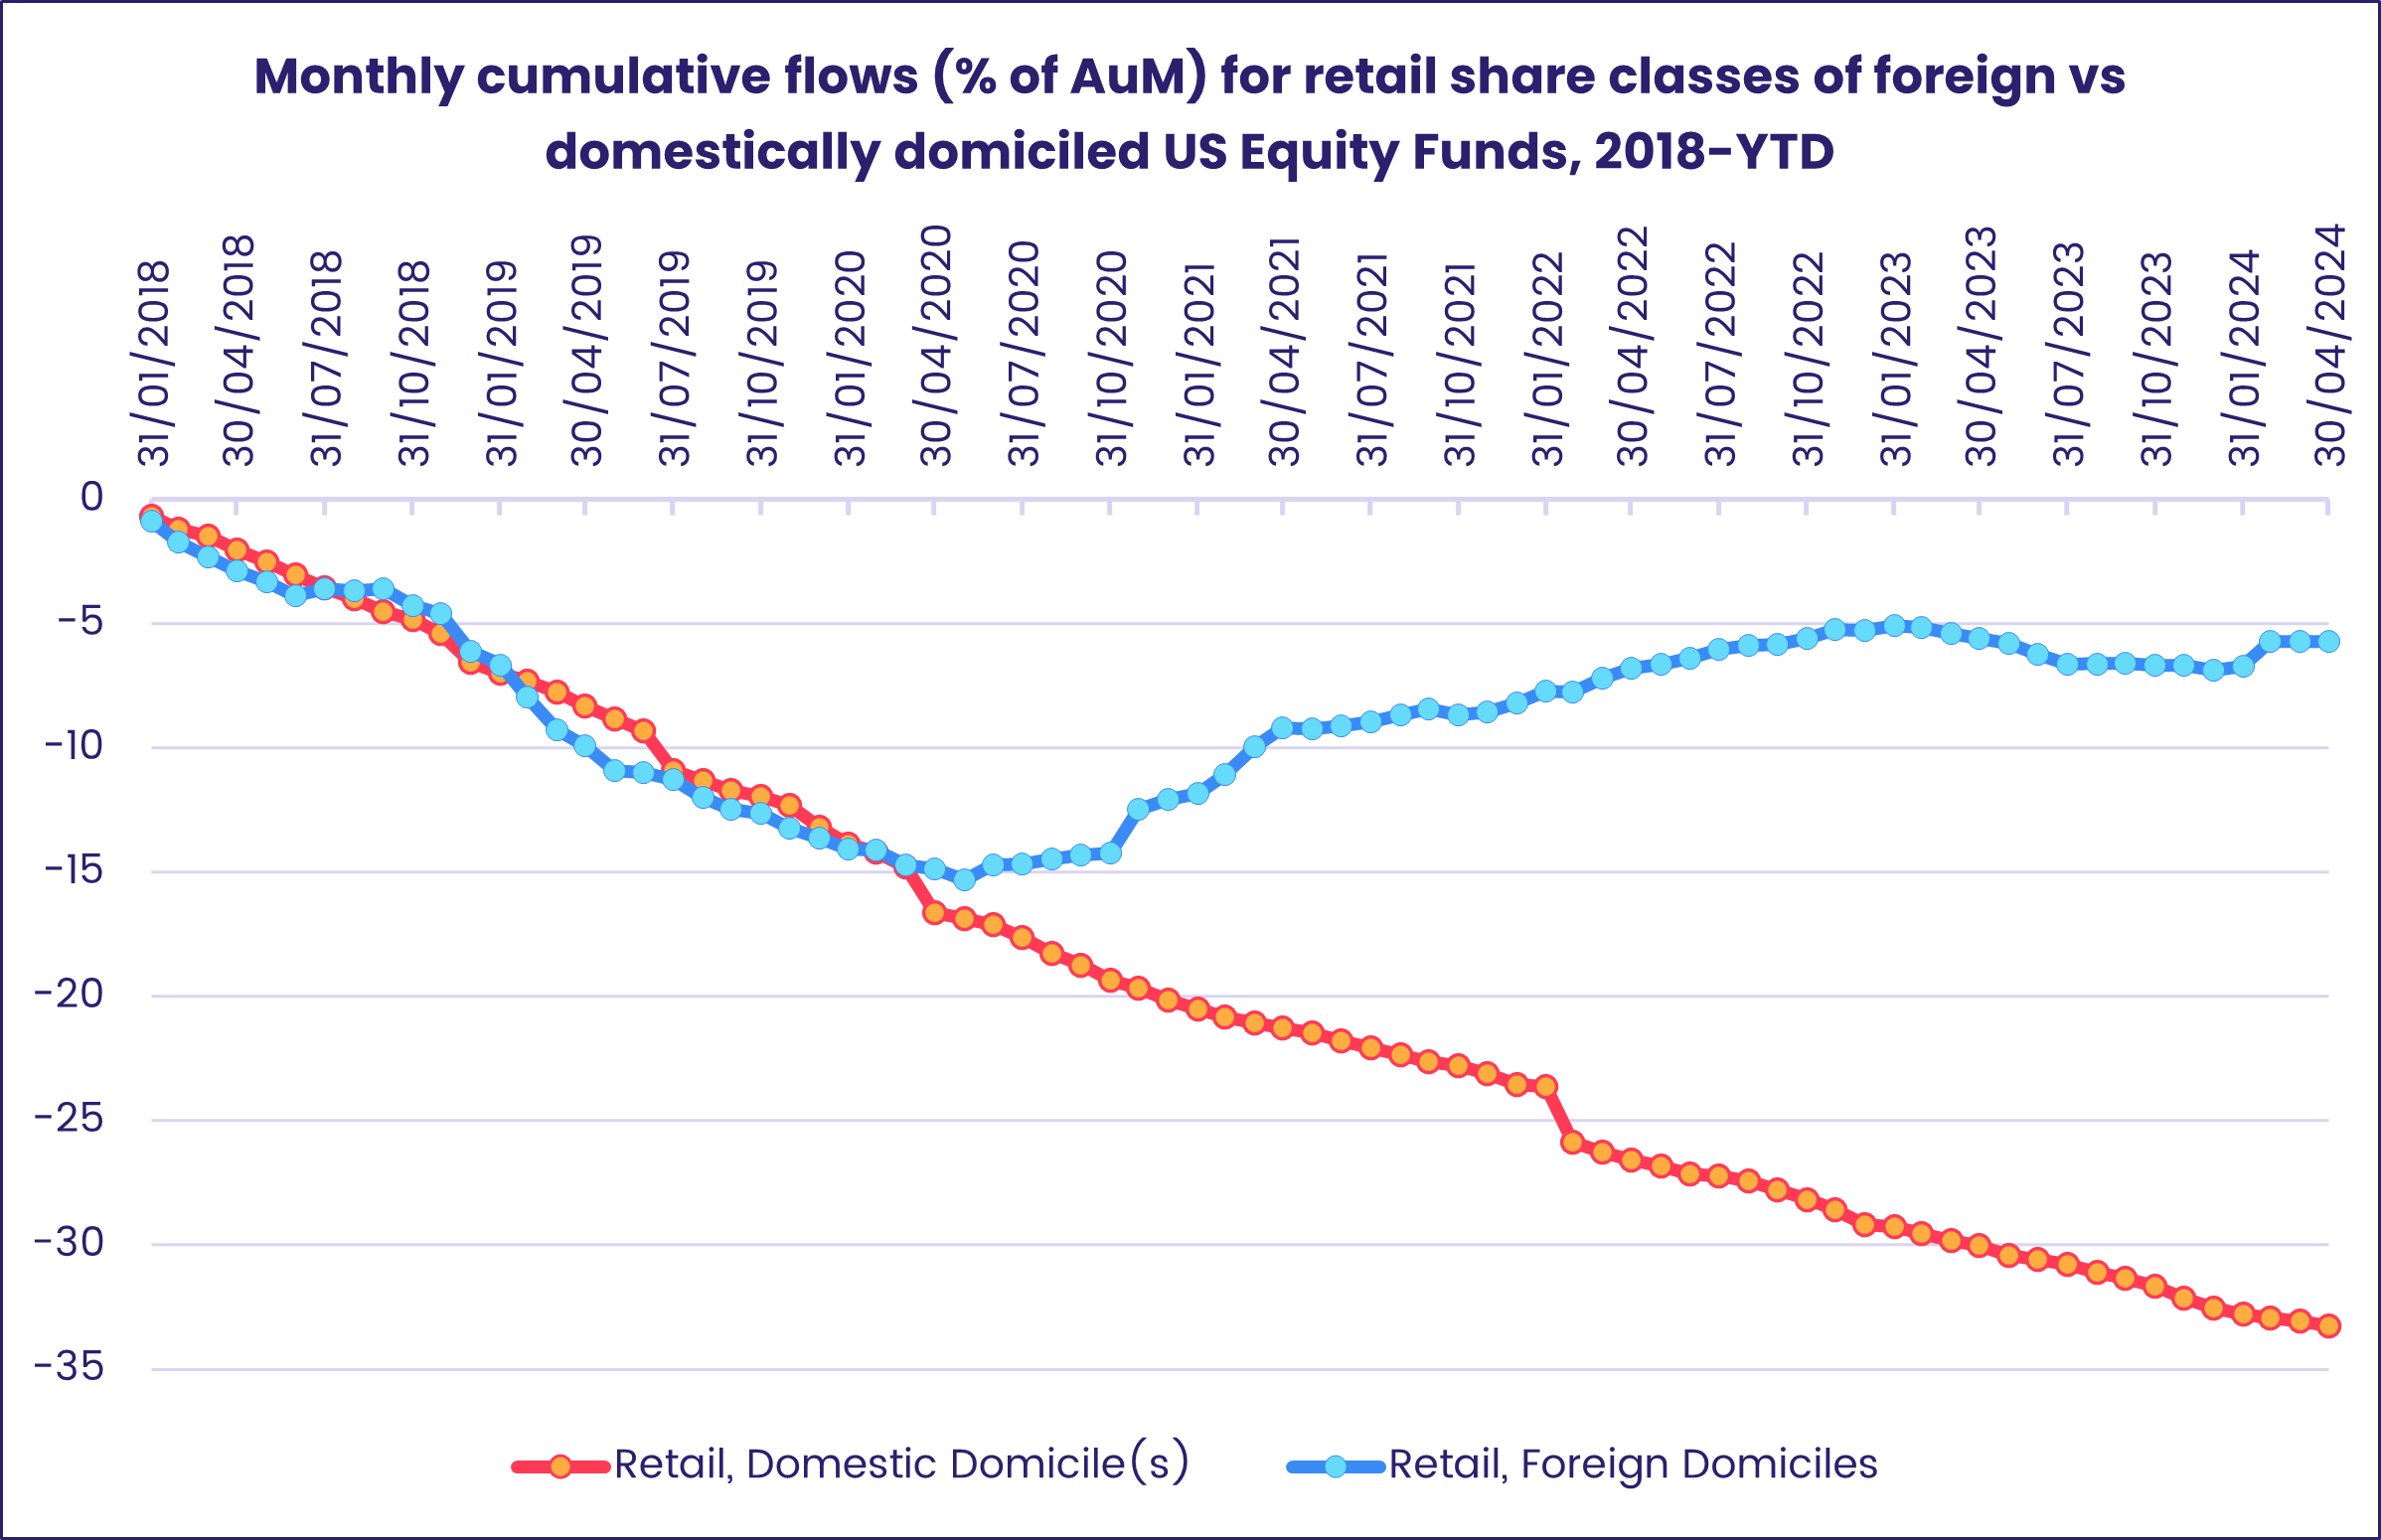 Chart representing 'Monthly cumulative flows (% of AuM) for retail share classes of foreign vs domestically domiciled US Equity Funds, 2018-YTD'